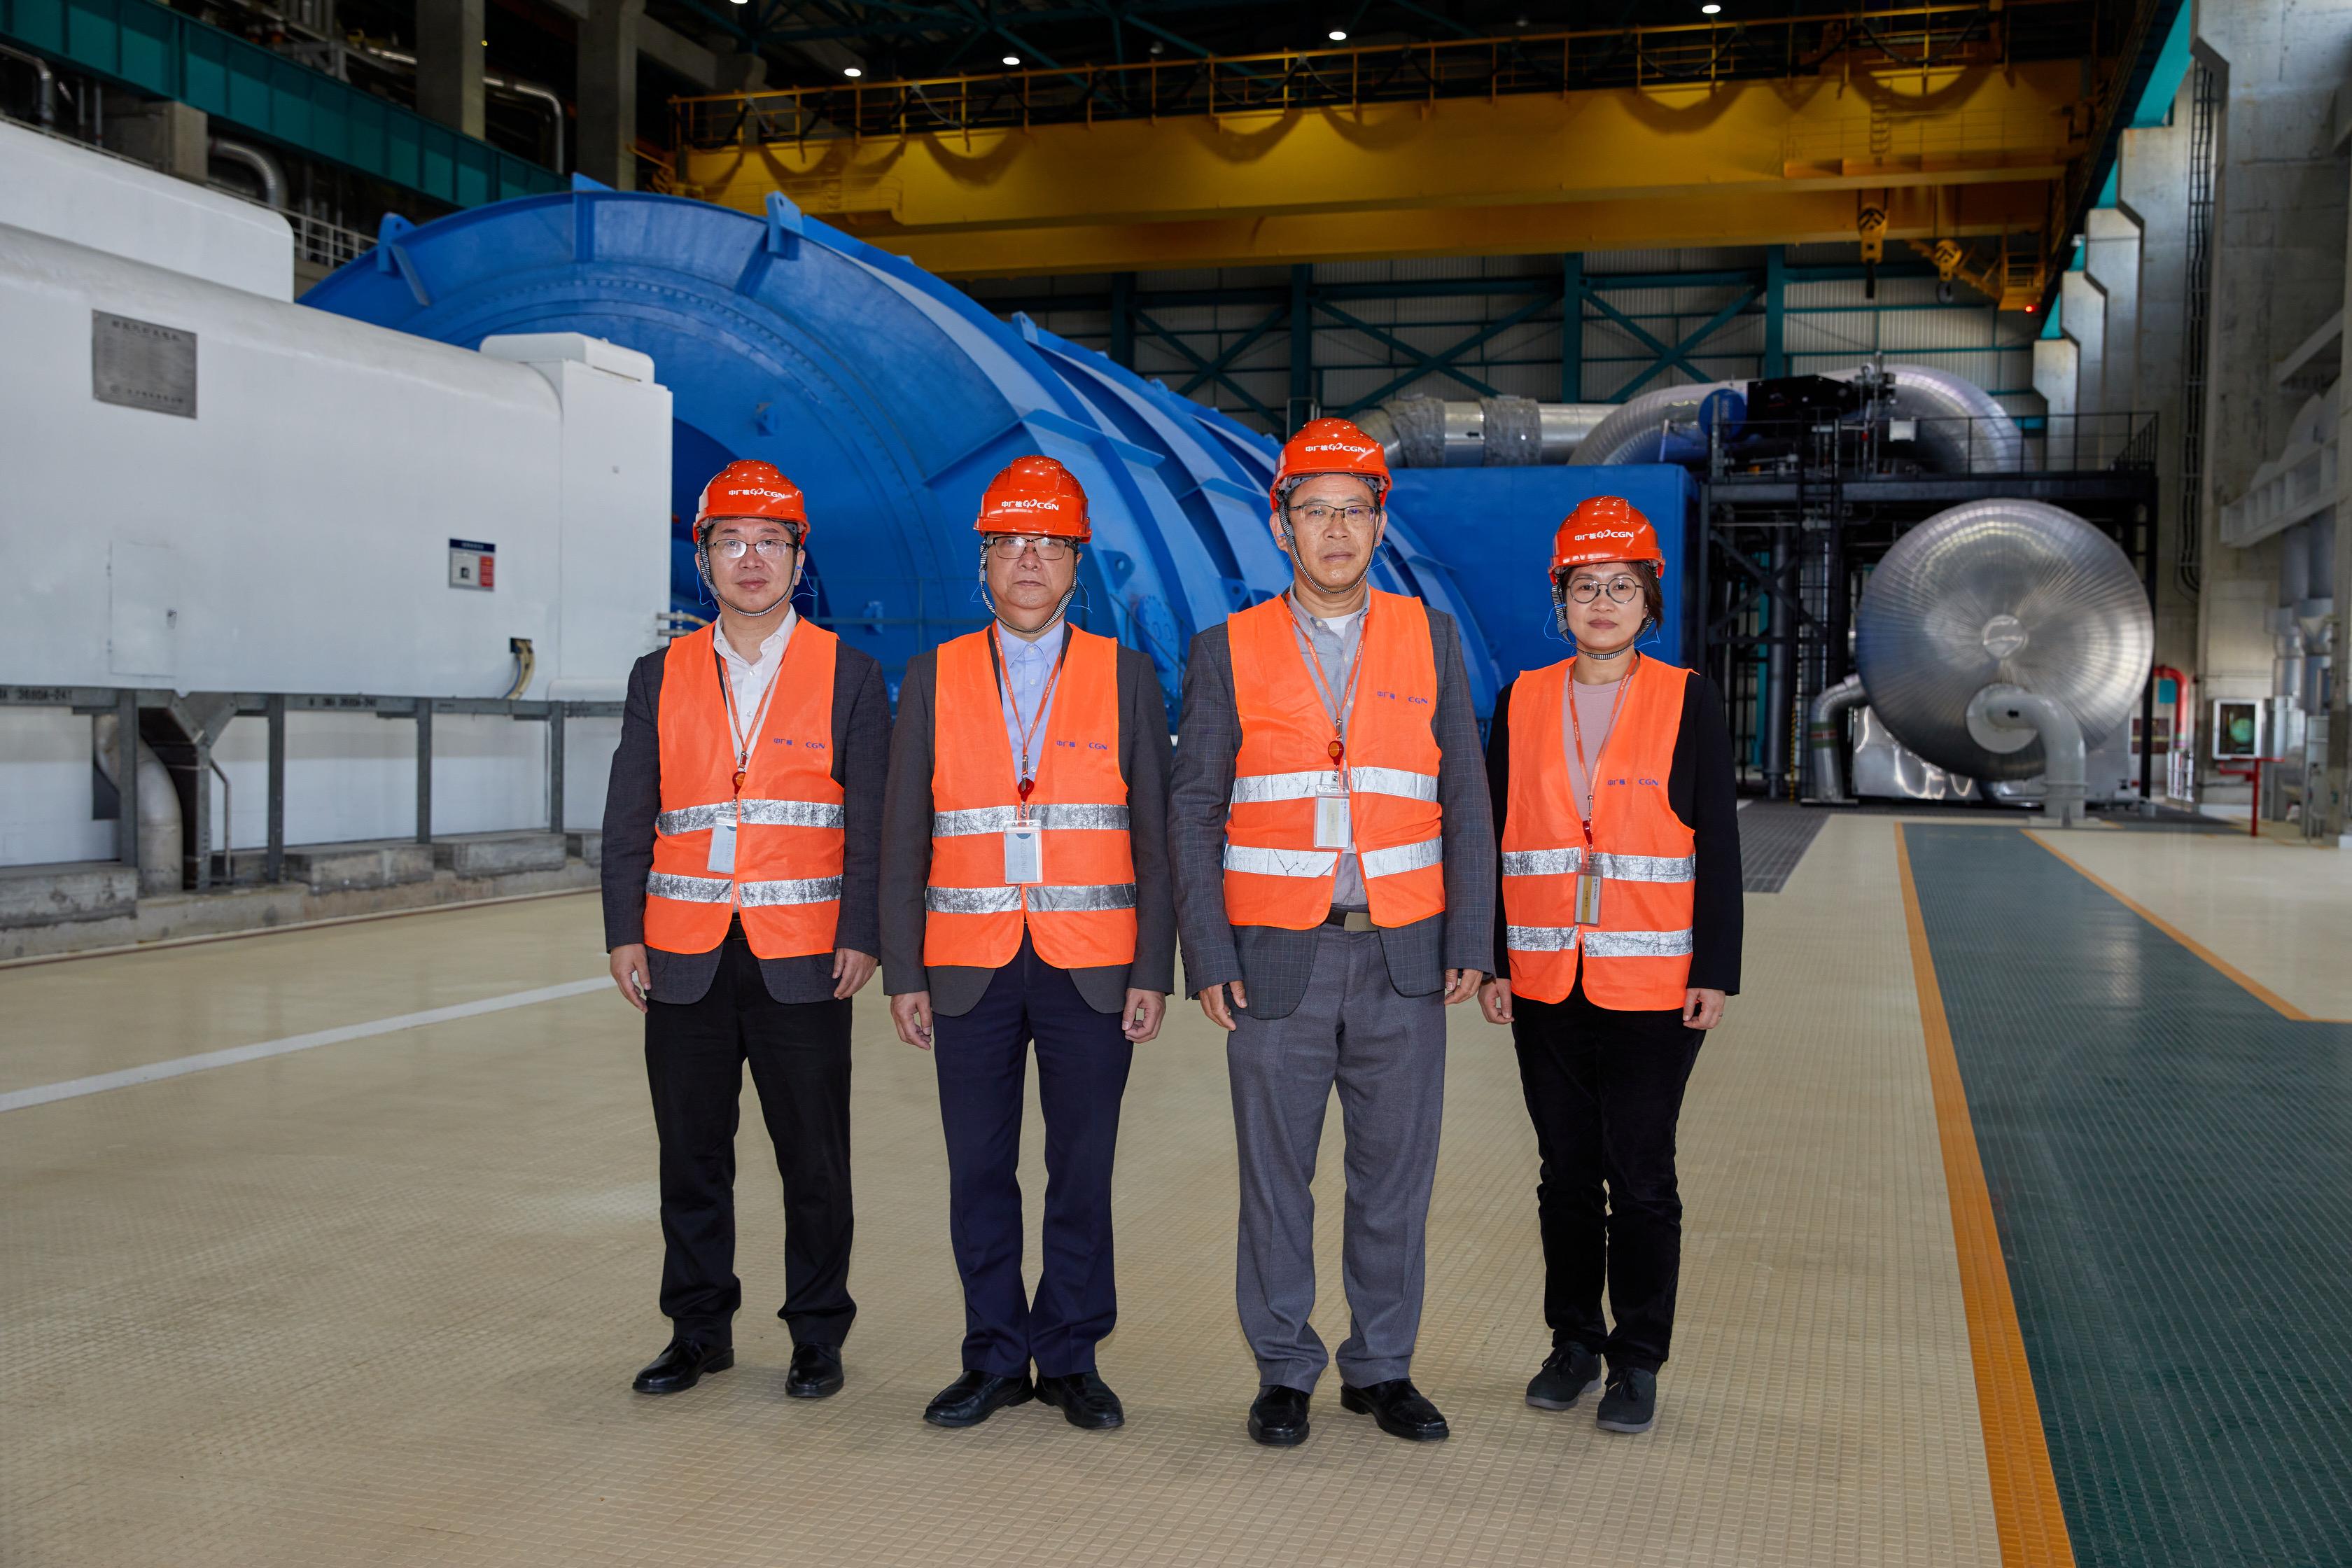 The Secretary for Environment and Ecology, Mr Tse Chin-wan, visited the China General Nuclear Power Corporation Limited and the Daya Bay Nuclear Power Site in Shenzhen today (March 8). Photo shows Mr Tse (second left), pictured with the Vice President of CGN Power Co., Ltd., Mr Zhou Jianping (first left), and the Chairman of Daya Bay Nuclear Power Operations and Management Co., Ltd., Mr Jiang Xinghua (second right).